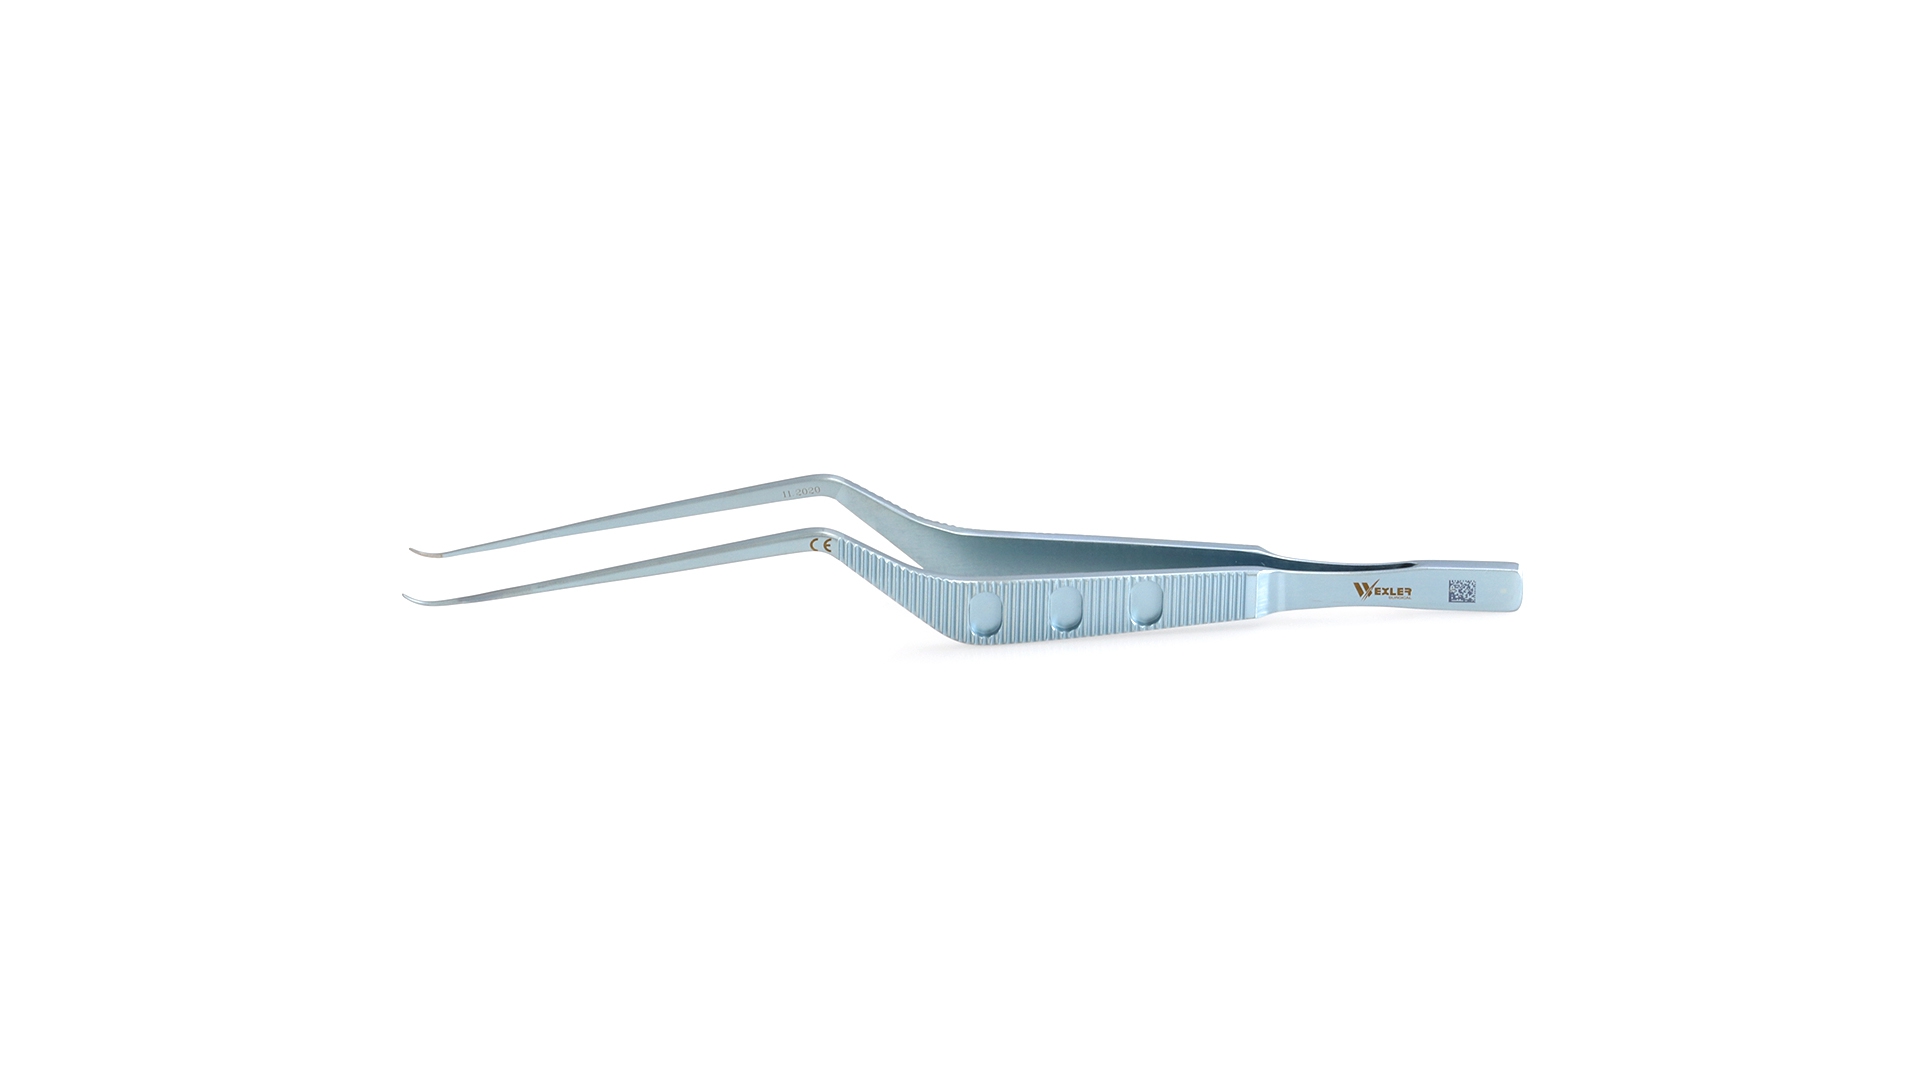 Micro Forceps - 0.5 mm Curved  Blunt  TC coated tips